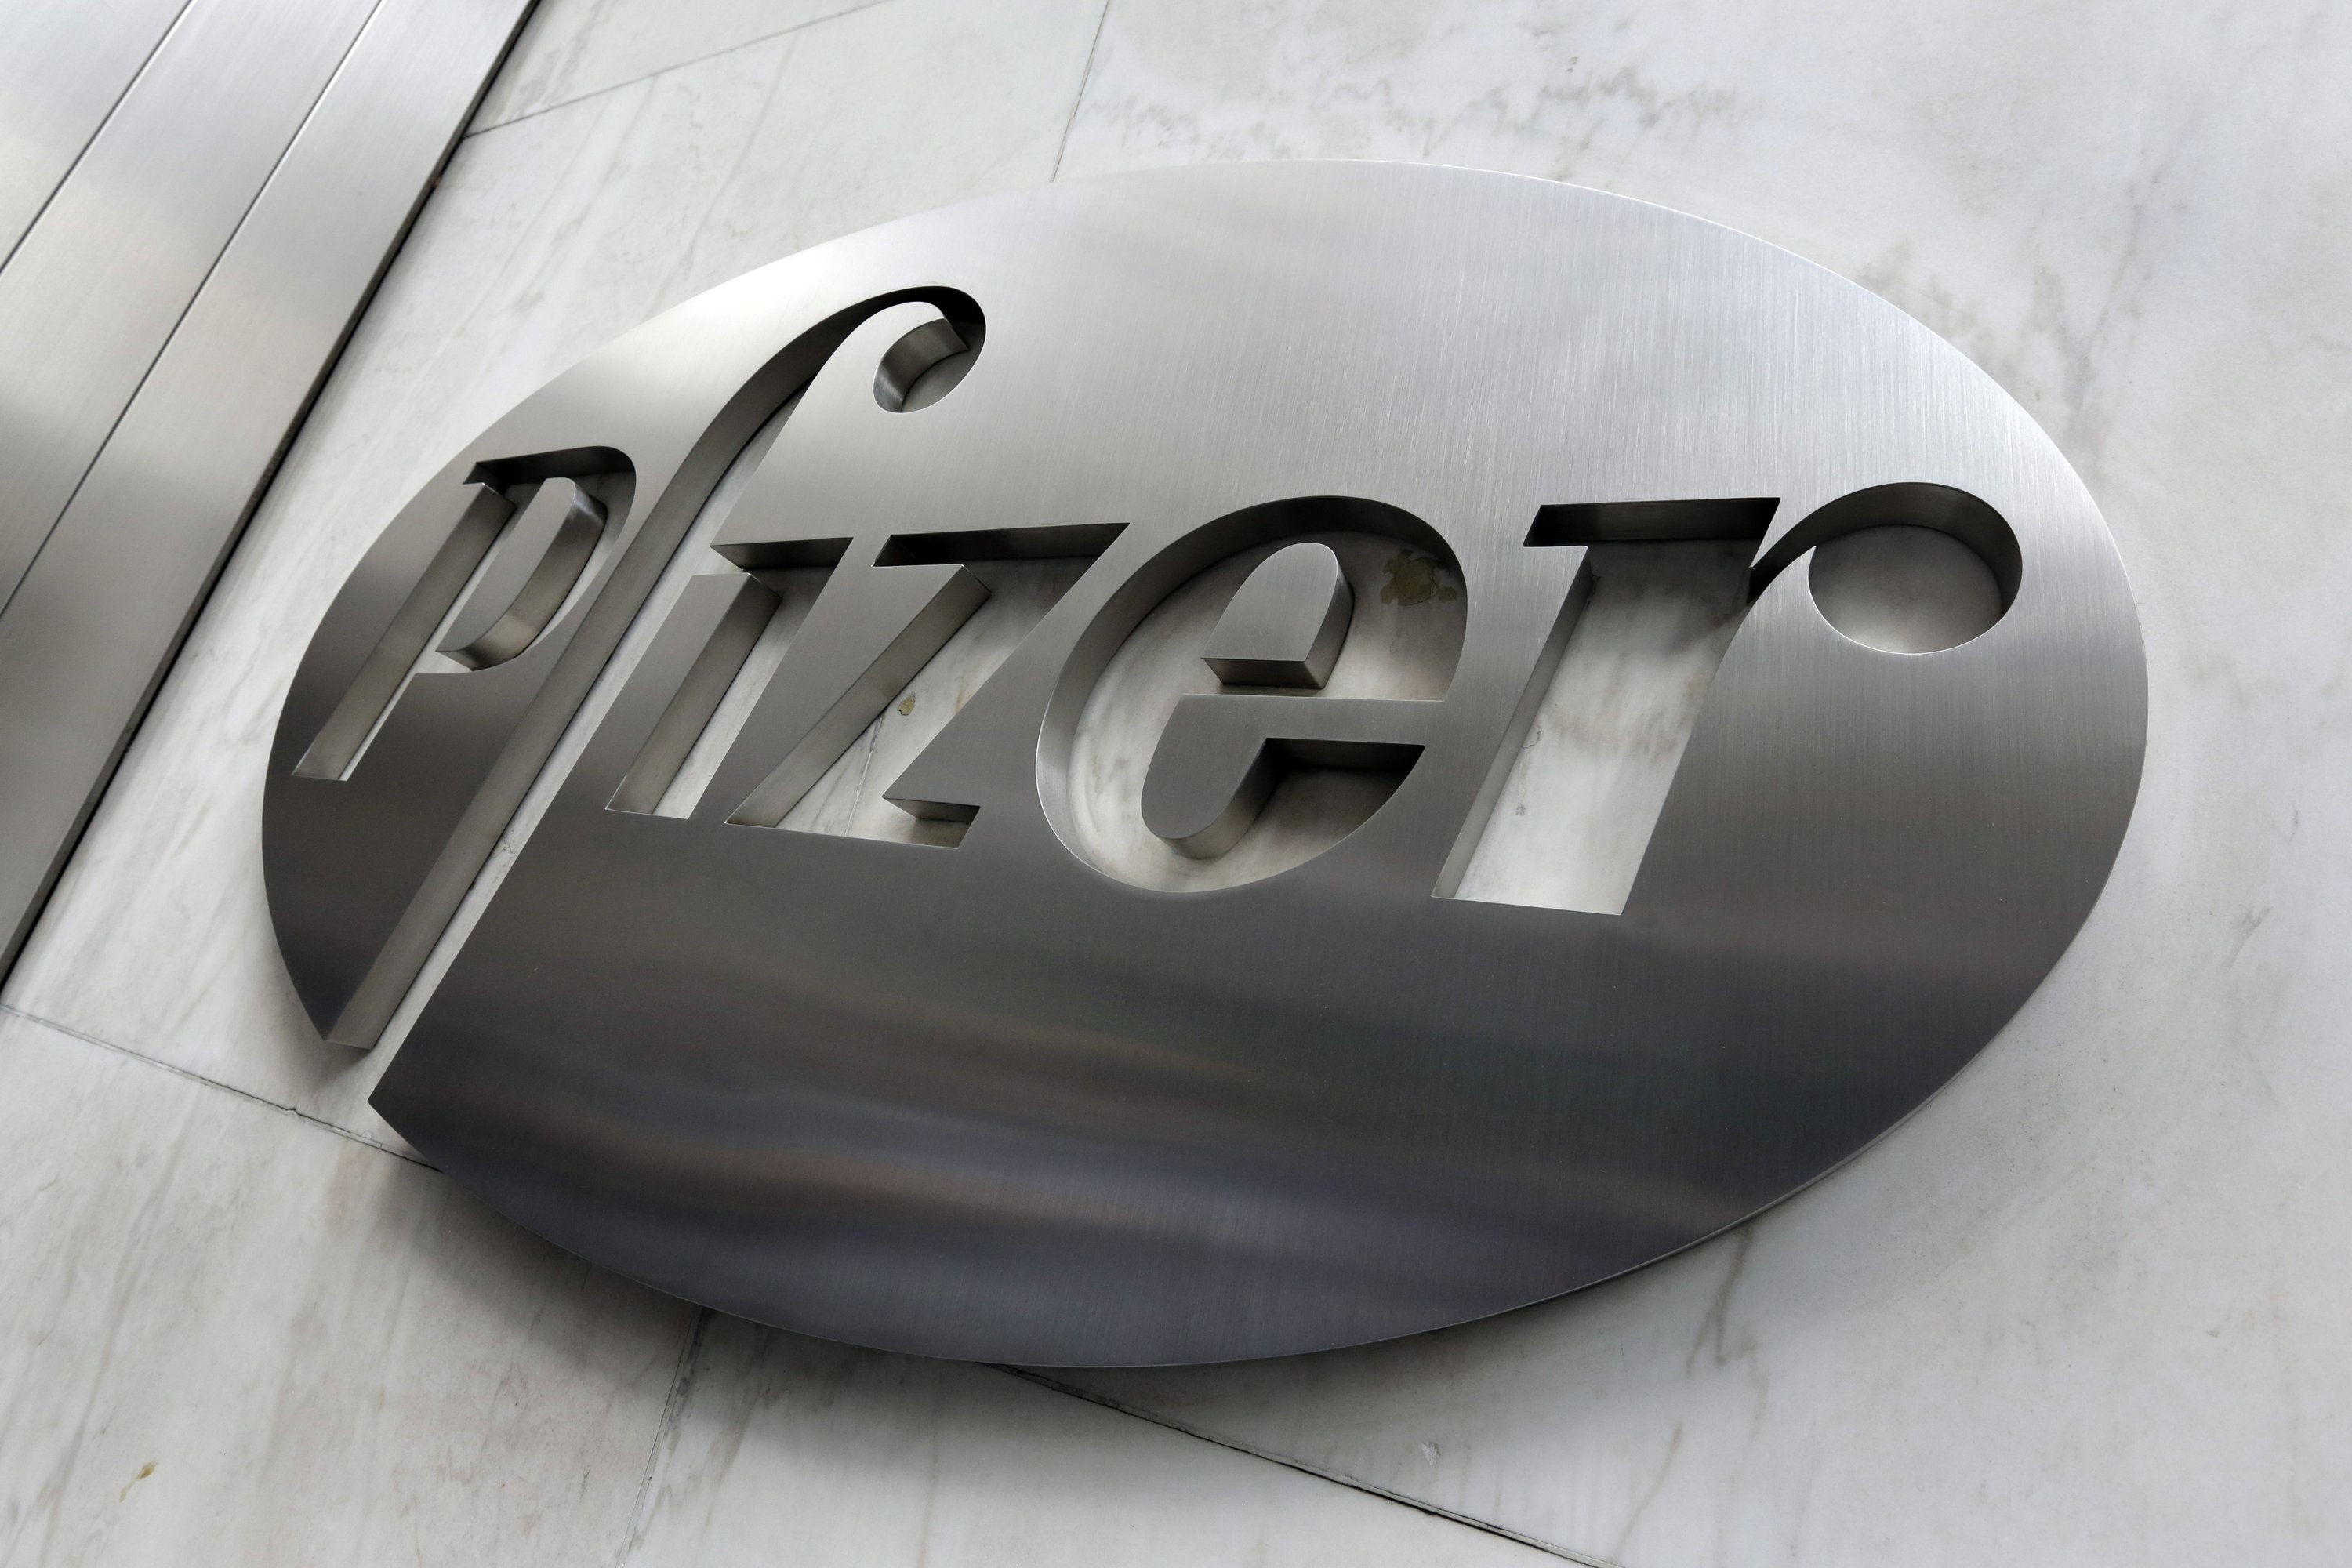 US signs contract with Pfizer for COVID-19 vaccine doses